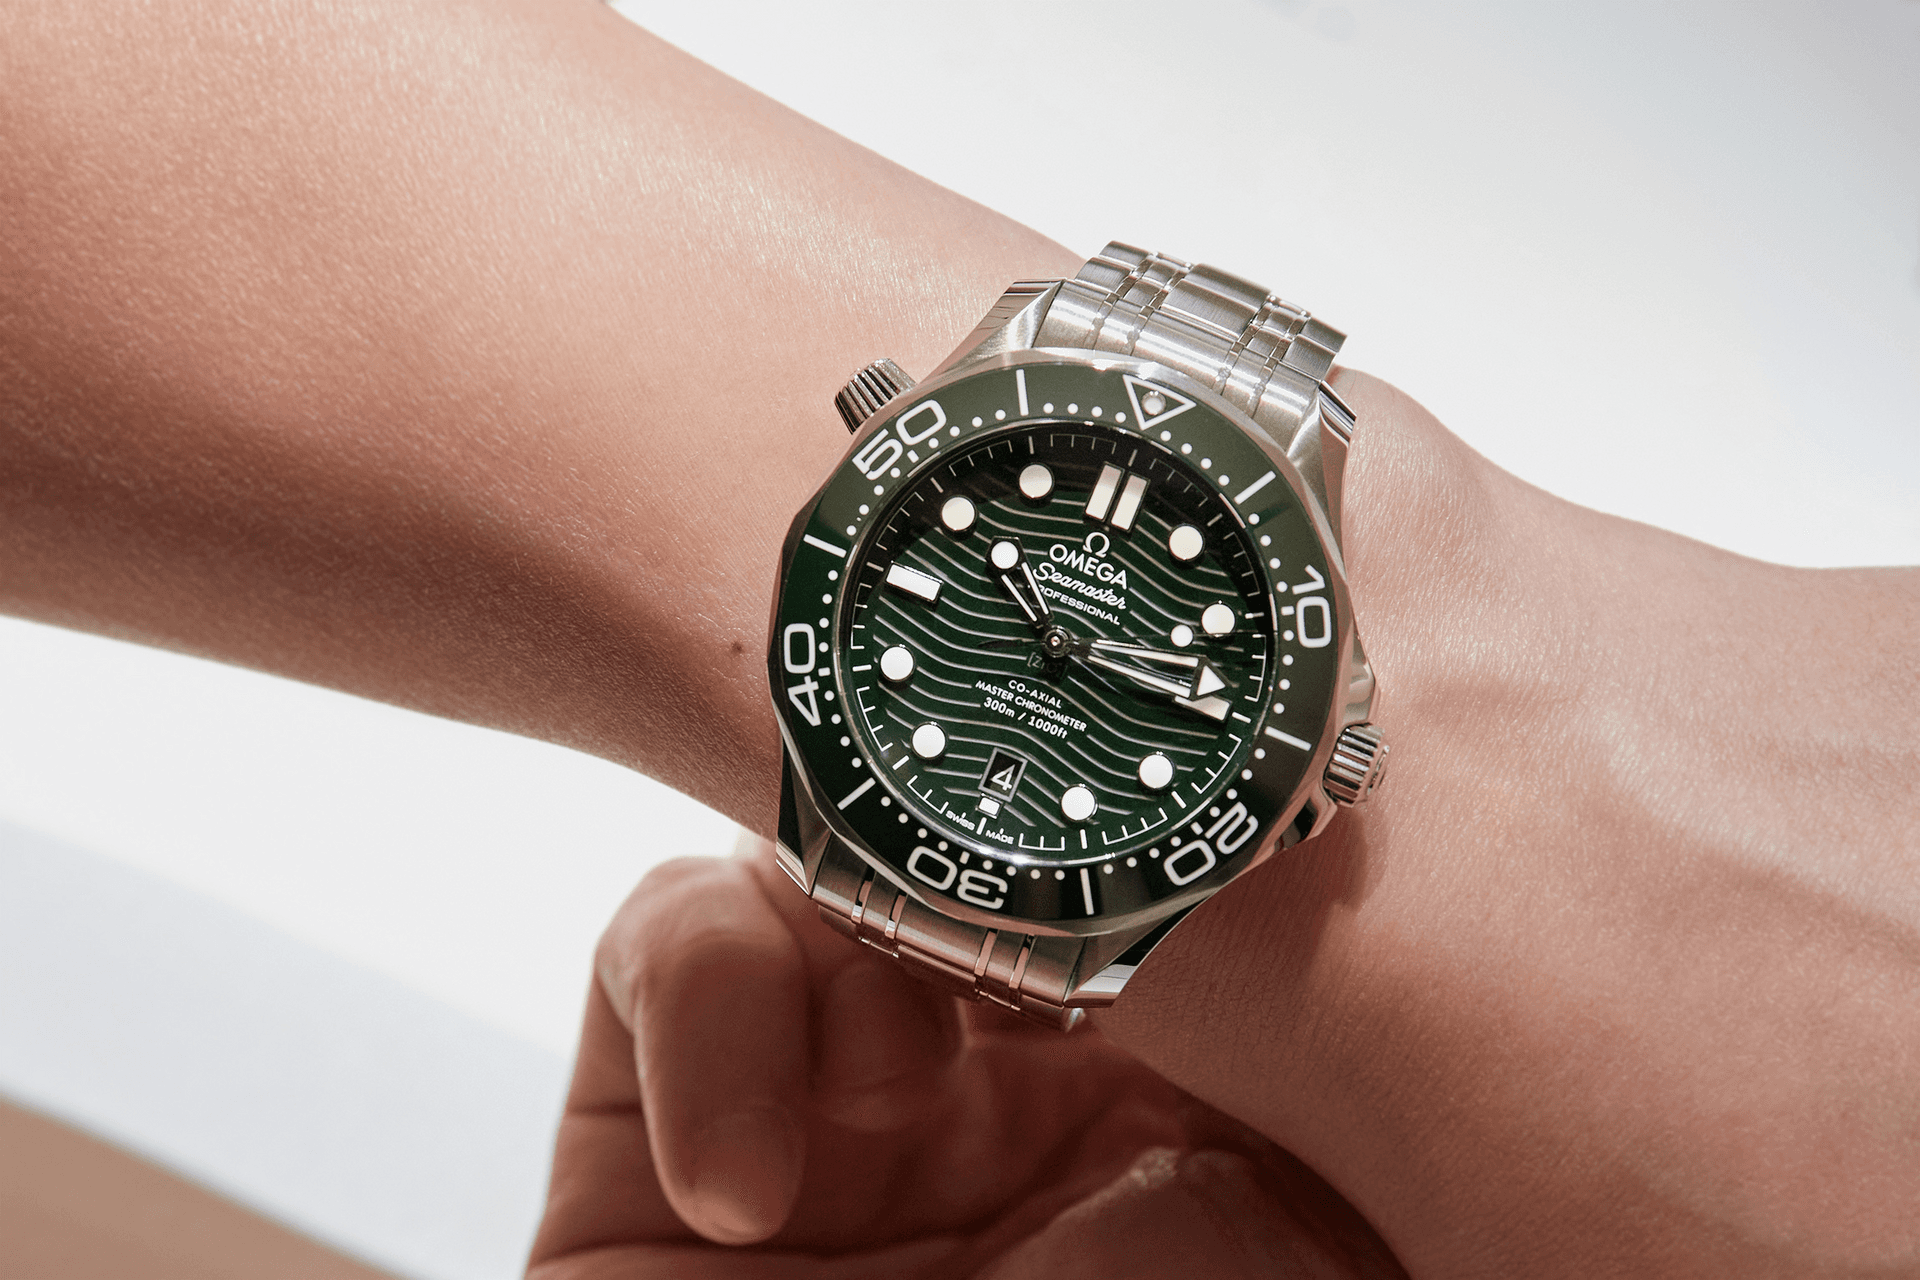 The Omega Seamaster's manual escape valve is a screw-down crown that, when unscrewed, enables the gas to escape while remaining waterproof Photo: Wristcheck